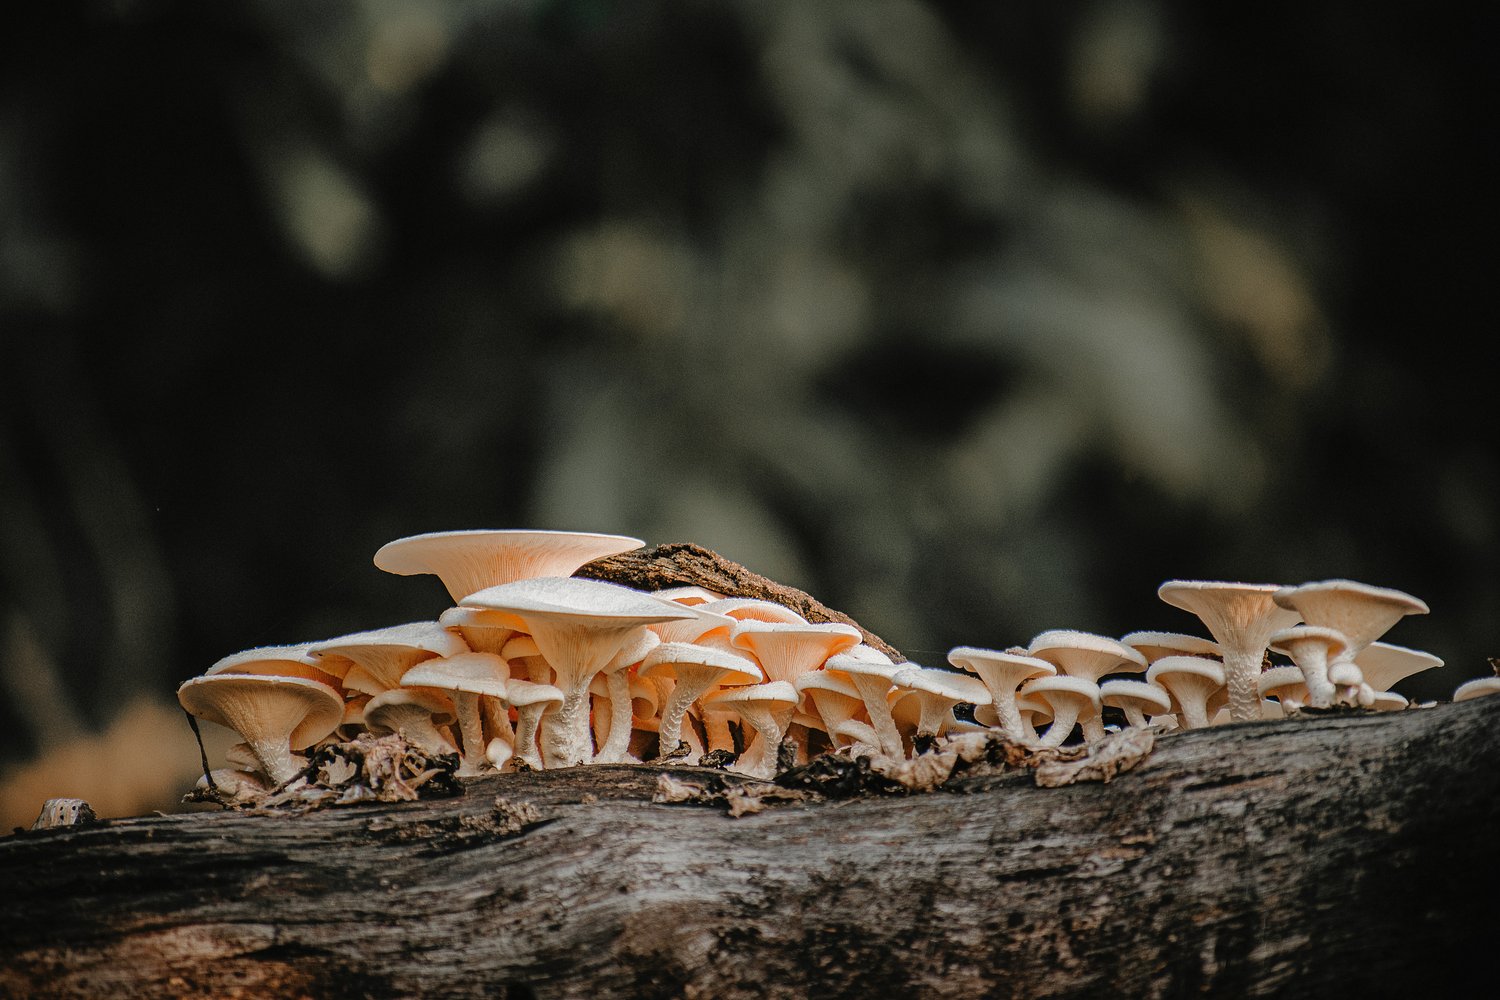 ﻿It’s time to include fungi in global conservation goals